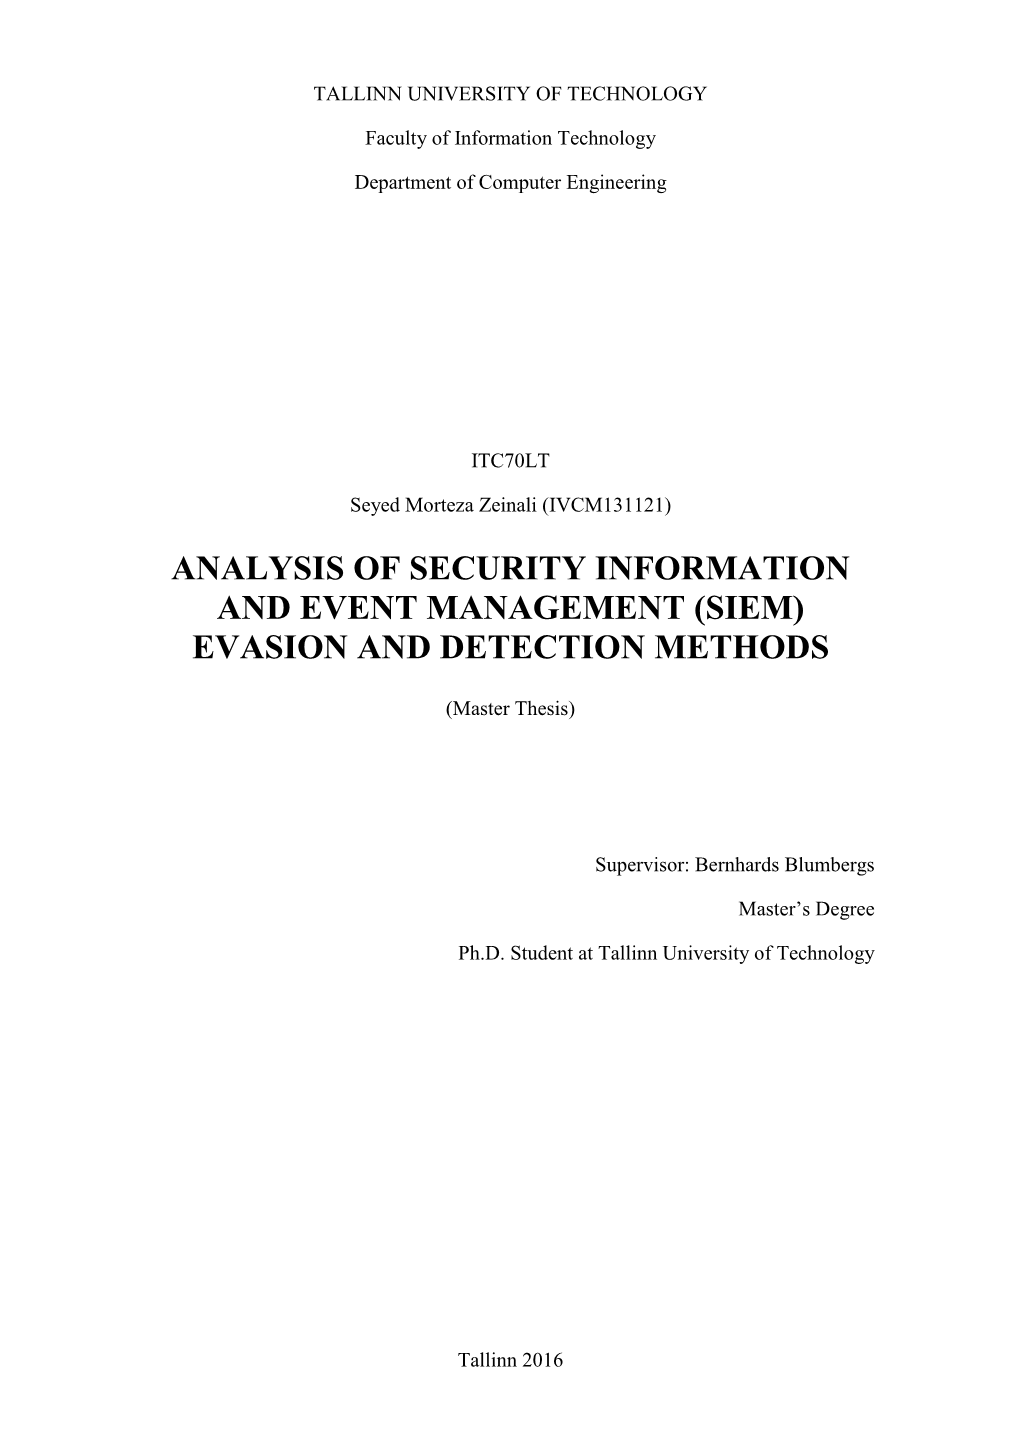 Analysis of Security Information and Event Management (Siem) Evasion and Detection Methods